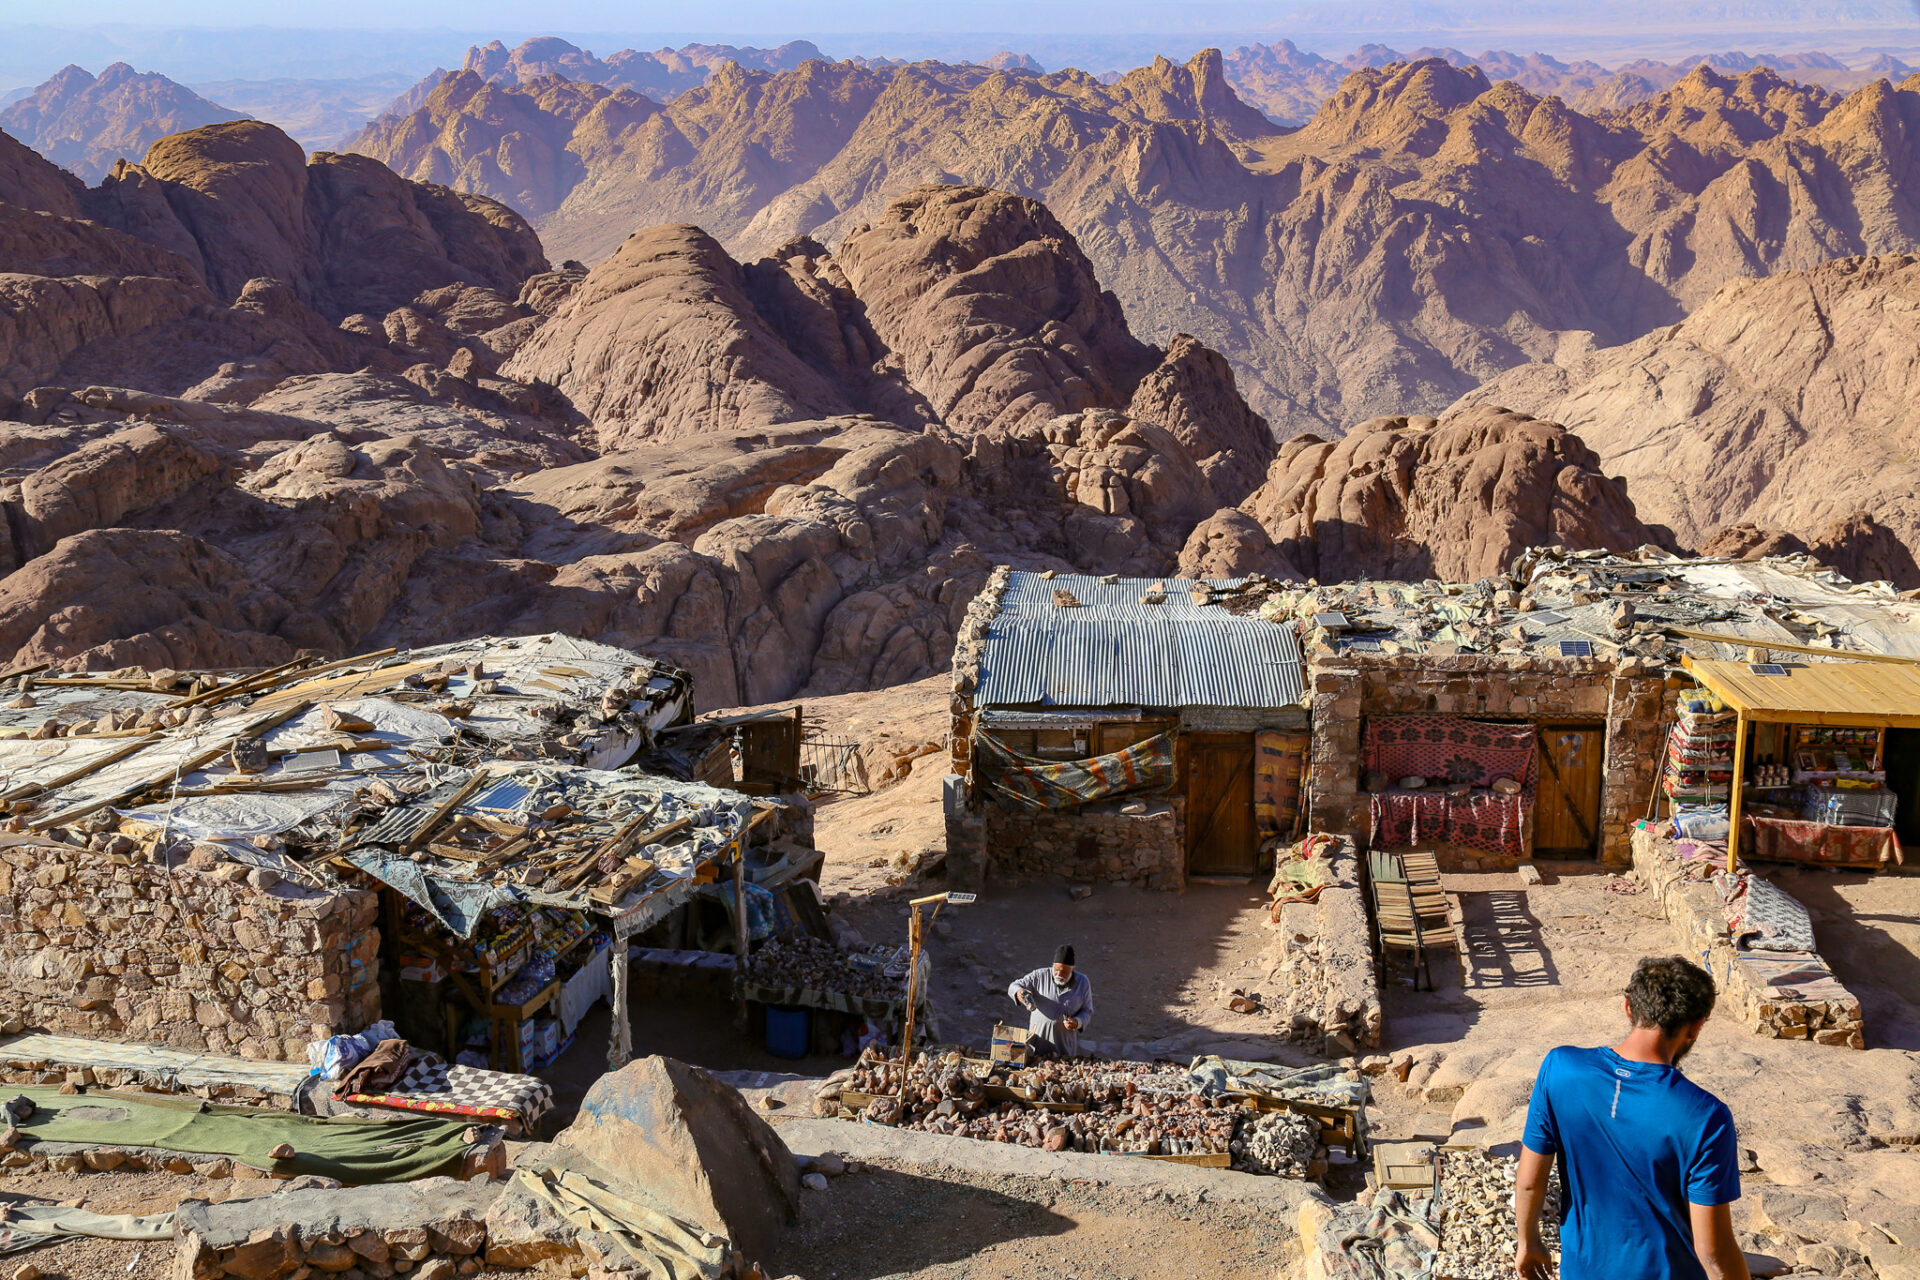 How to book the Mount Sinai hiking trail